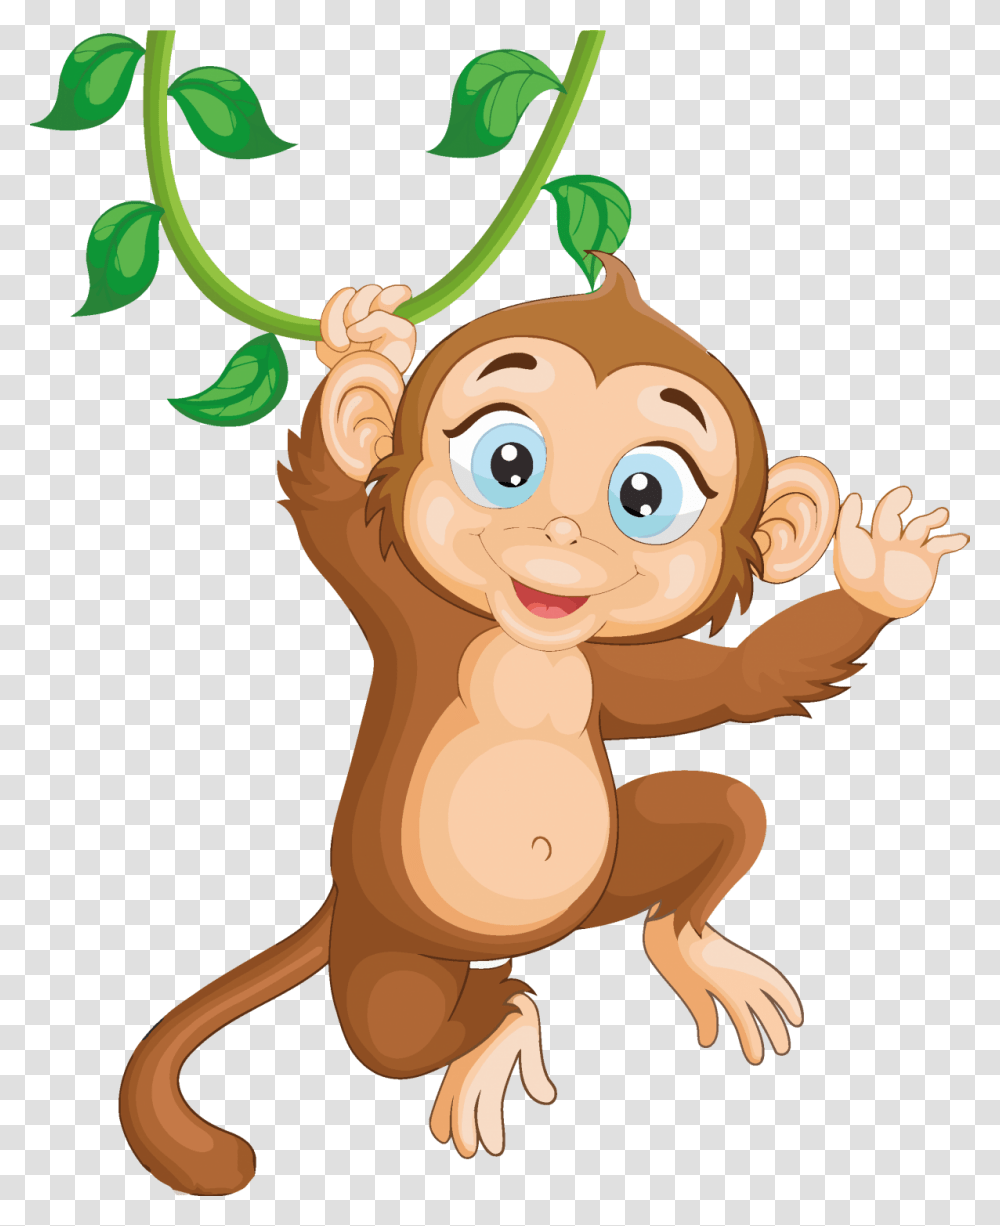 Monkey Clipart For Free Download Monkey Cartoon Images, Toy, Animal, Cupid Transparent Png